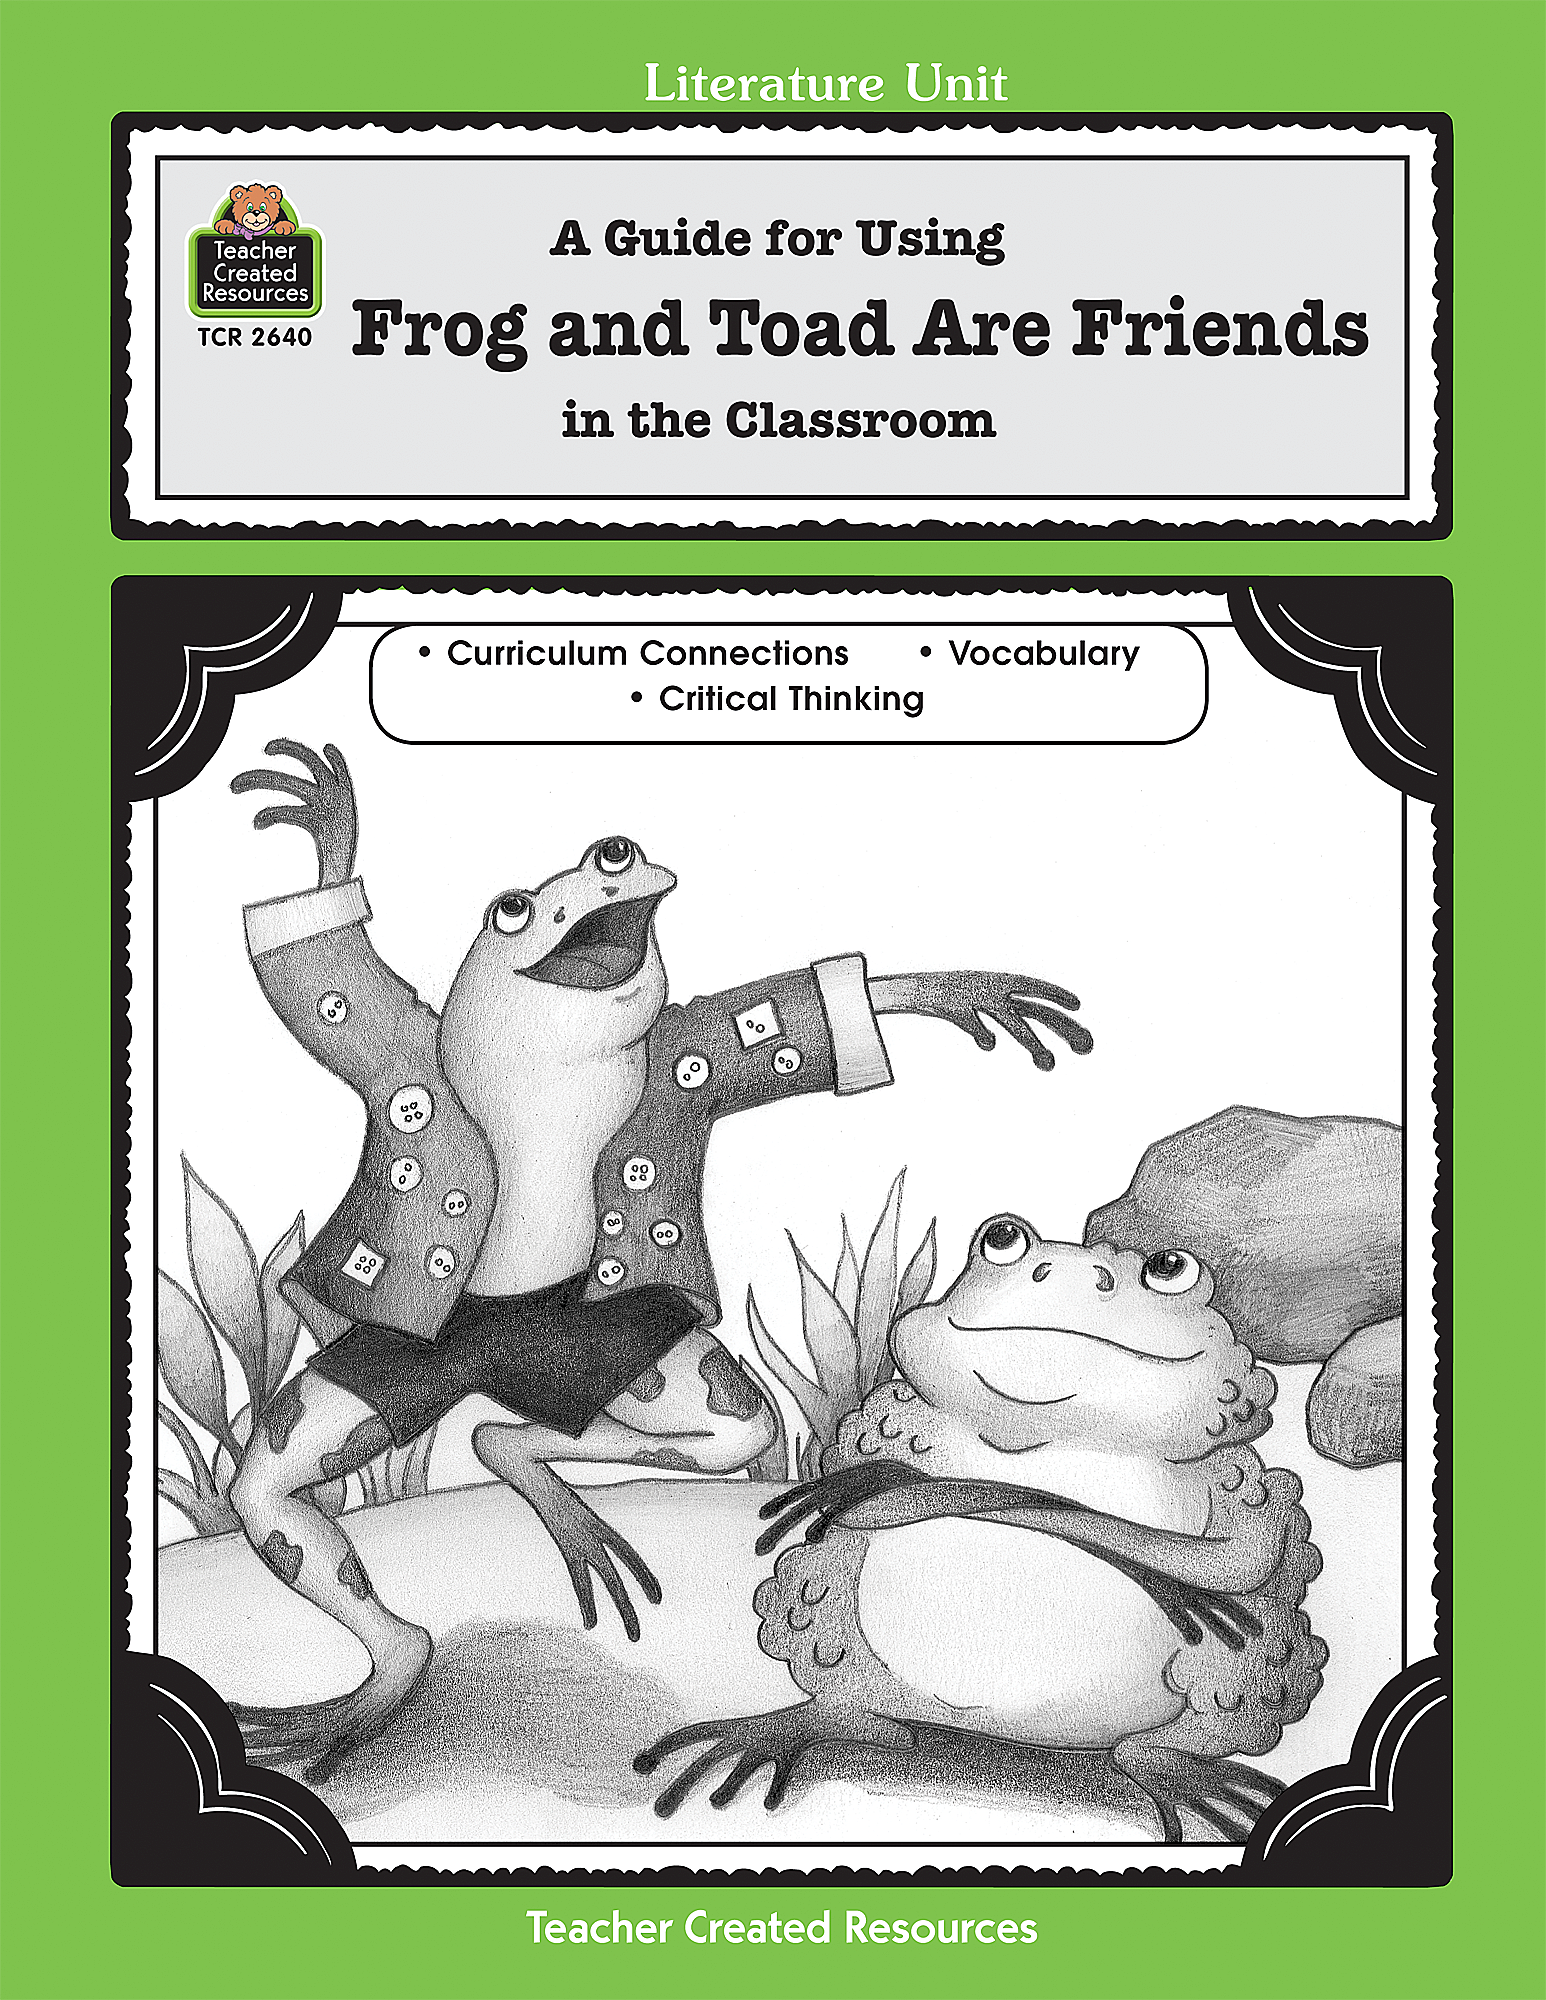 Lit. Unit: Frog and Toad Are Friends